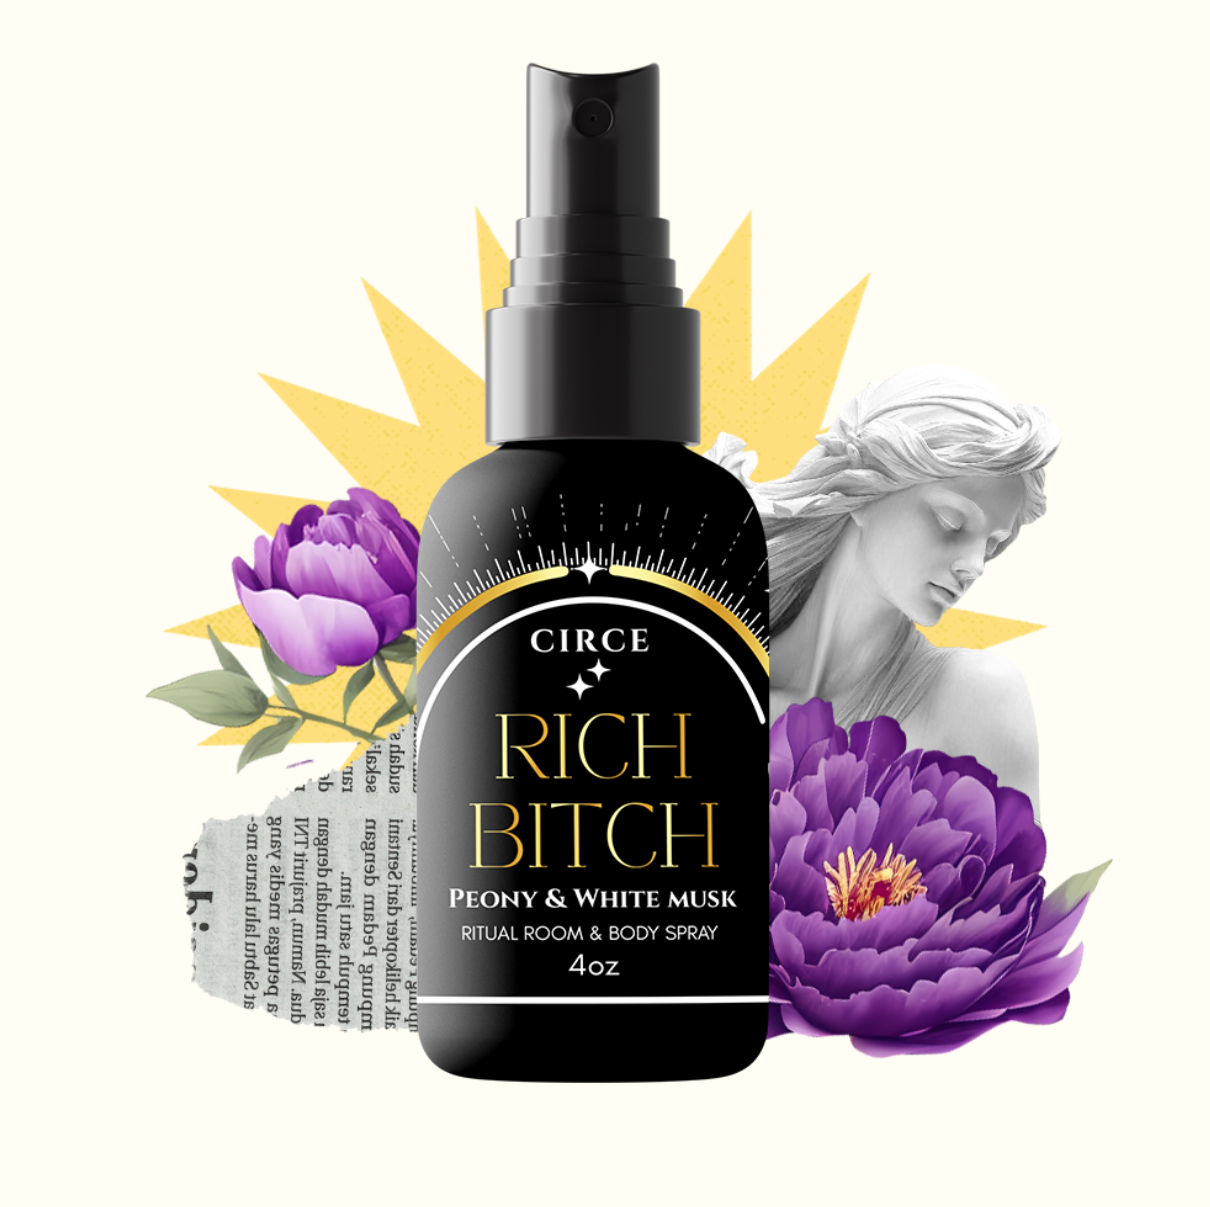 CIRCE Rich Bitch Ritual Room and Body Mist 4 oz  from Circe Boutique